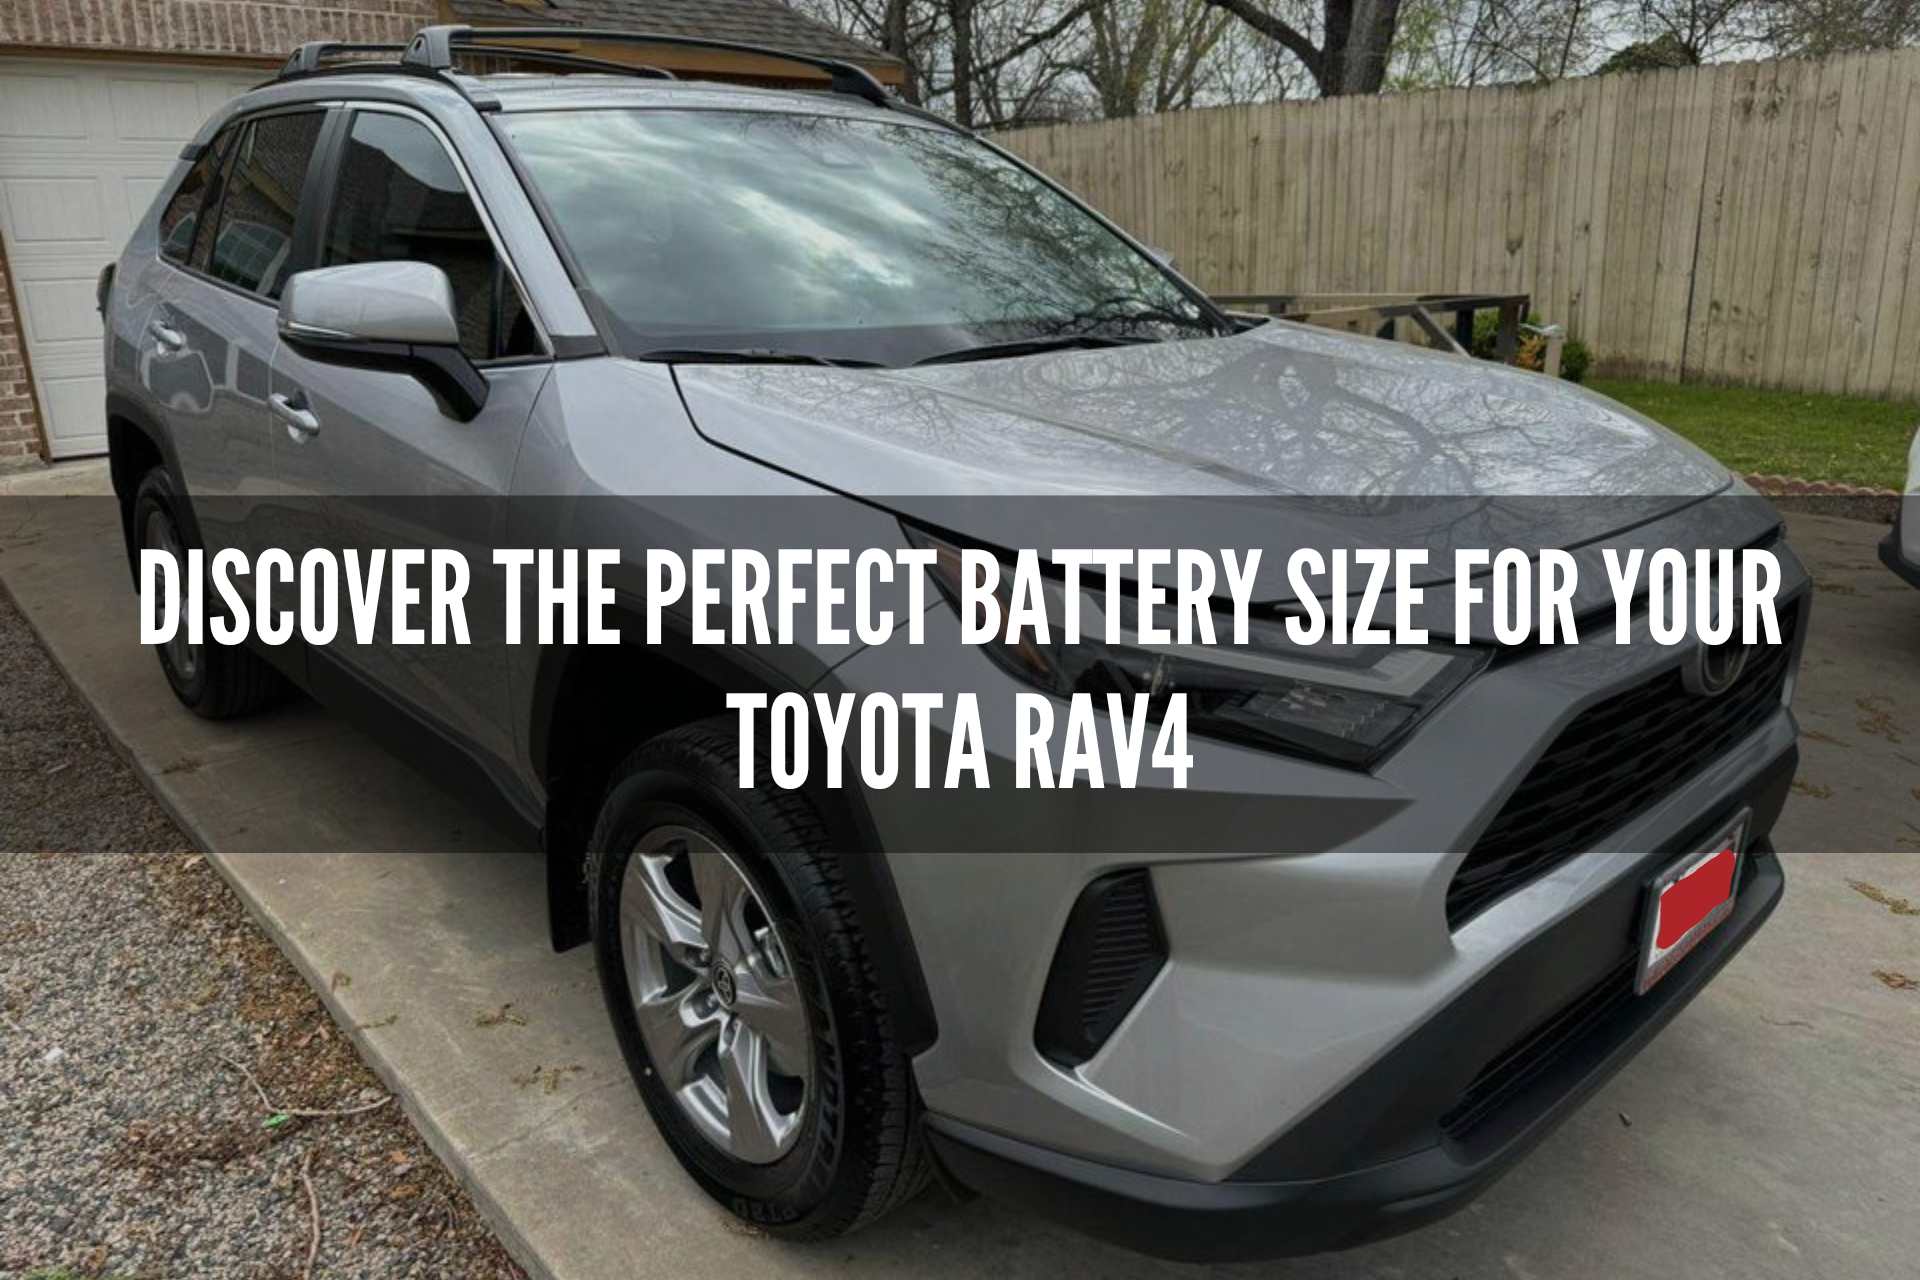 Discover the Perfect Battery Size for Your Toyota RAV4